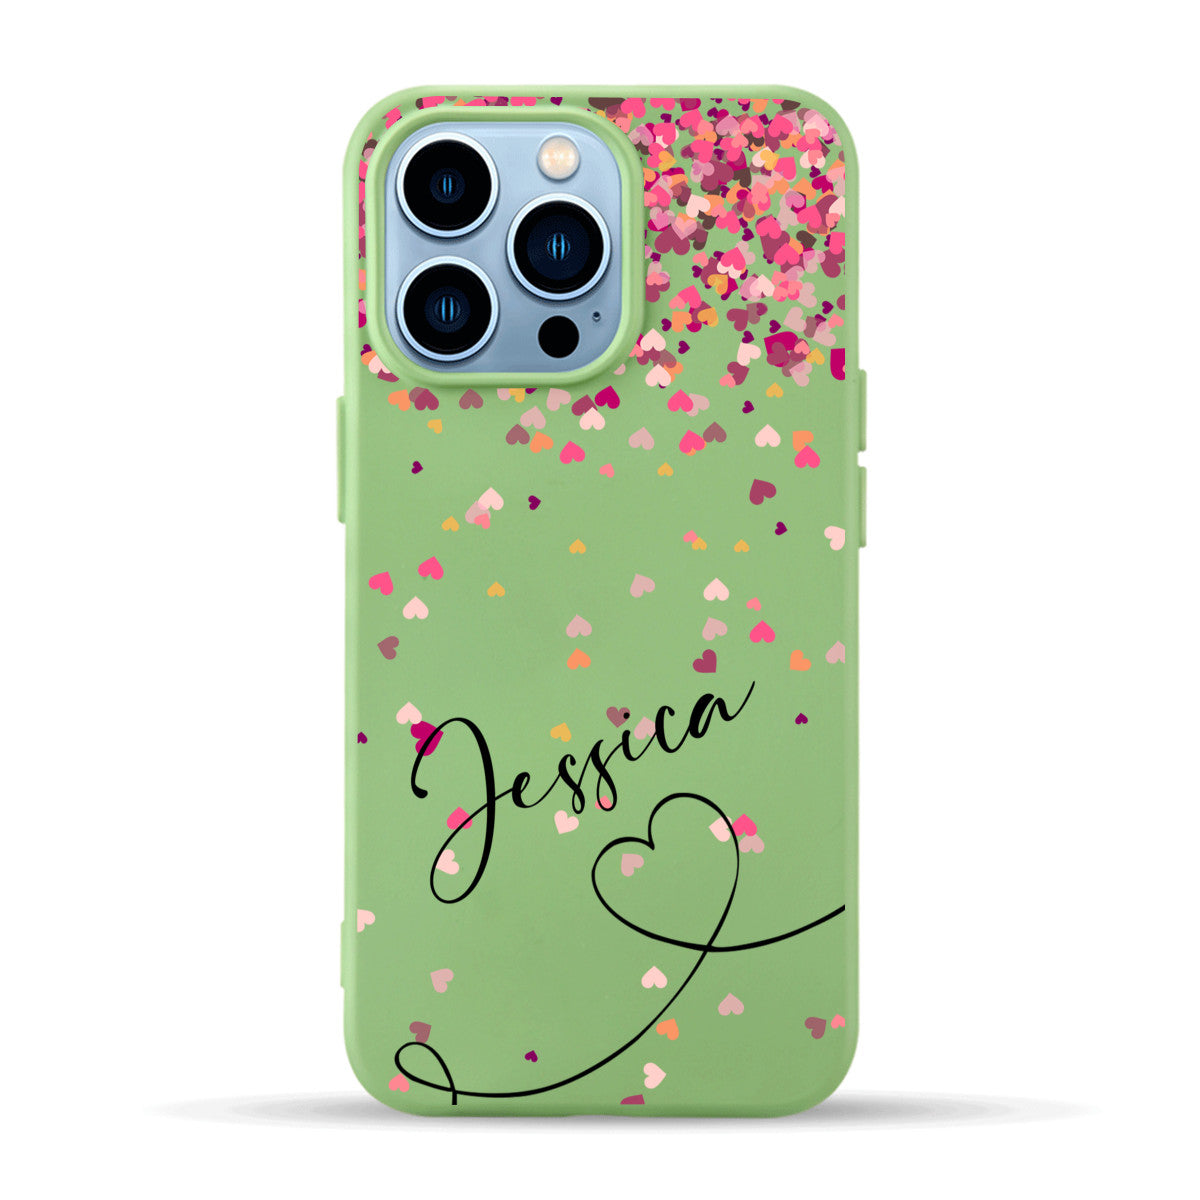 Personalised Name - iPhone Case